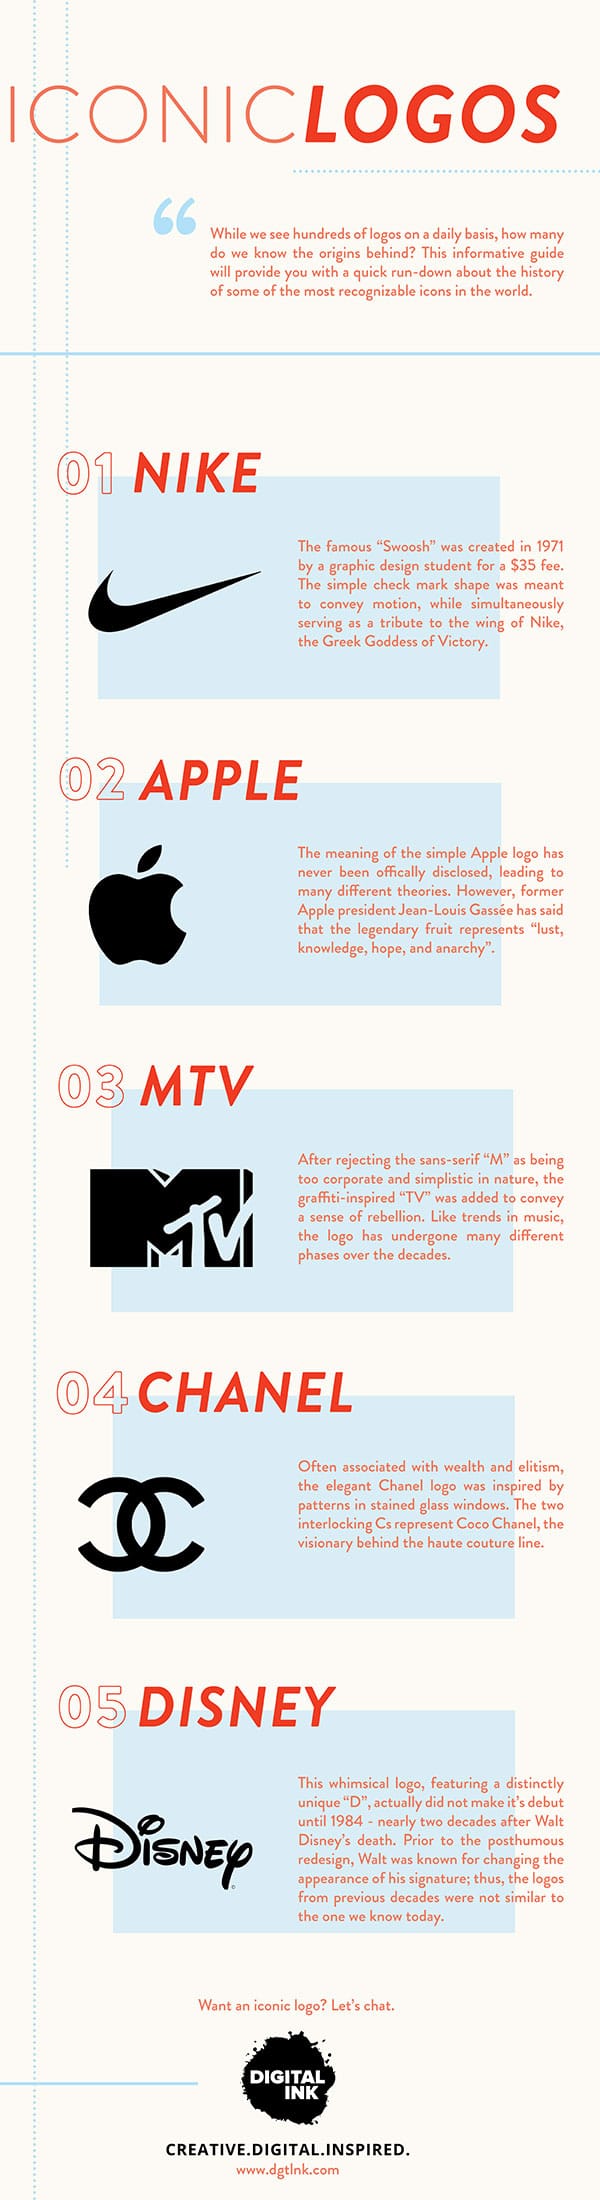 5 Iconic Logos and Their Origins